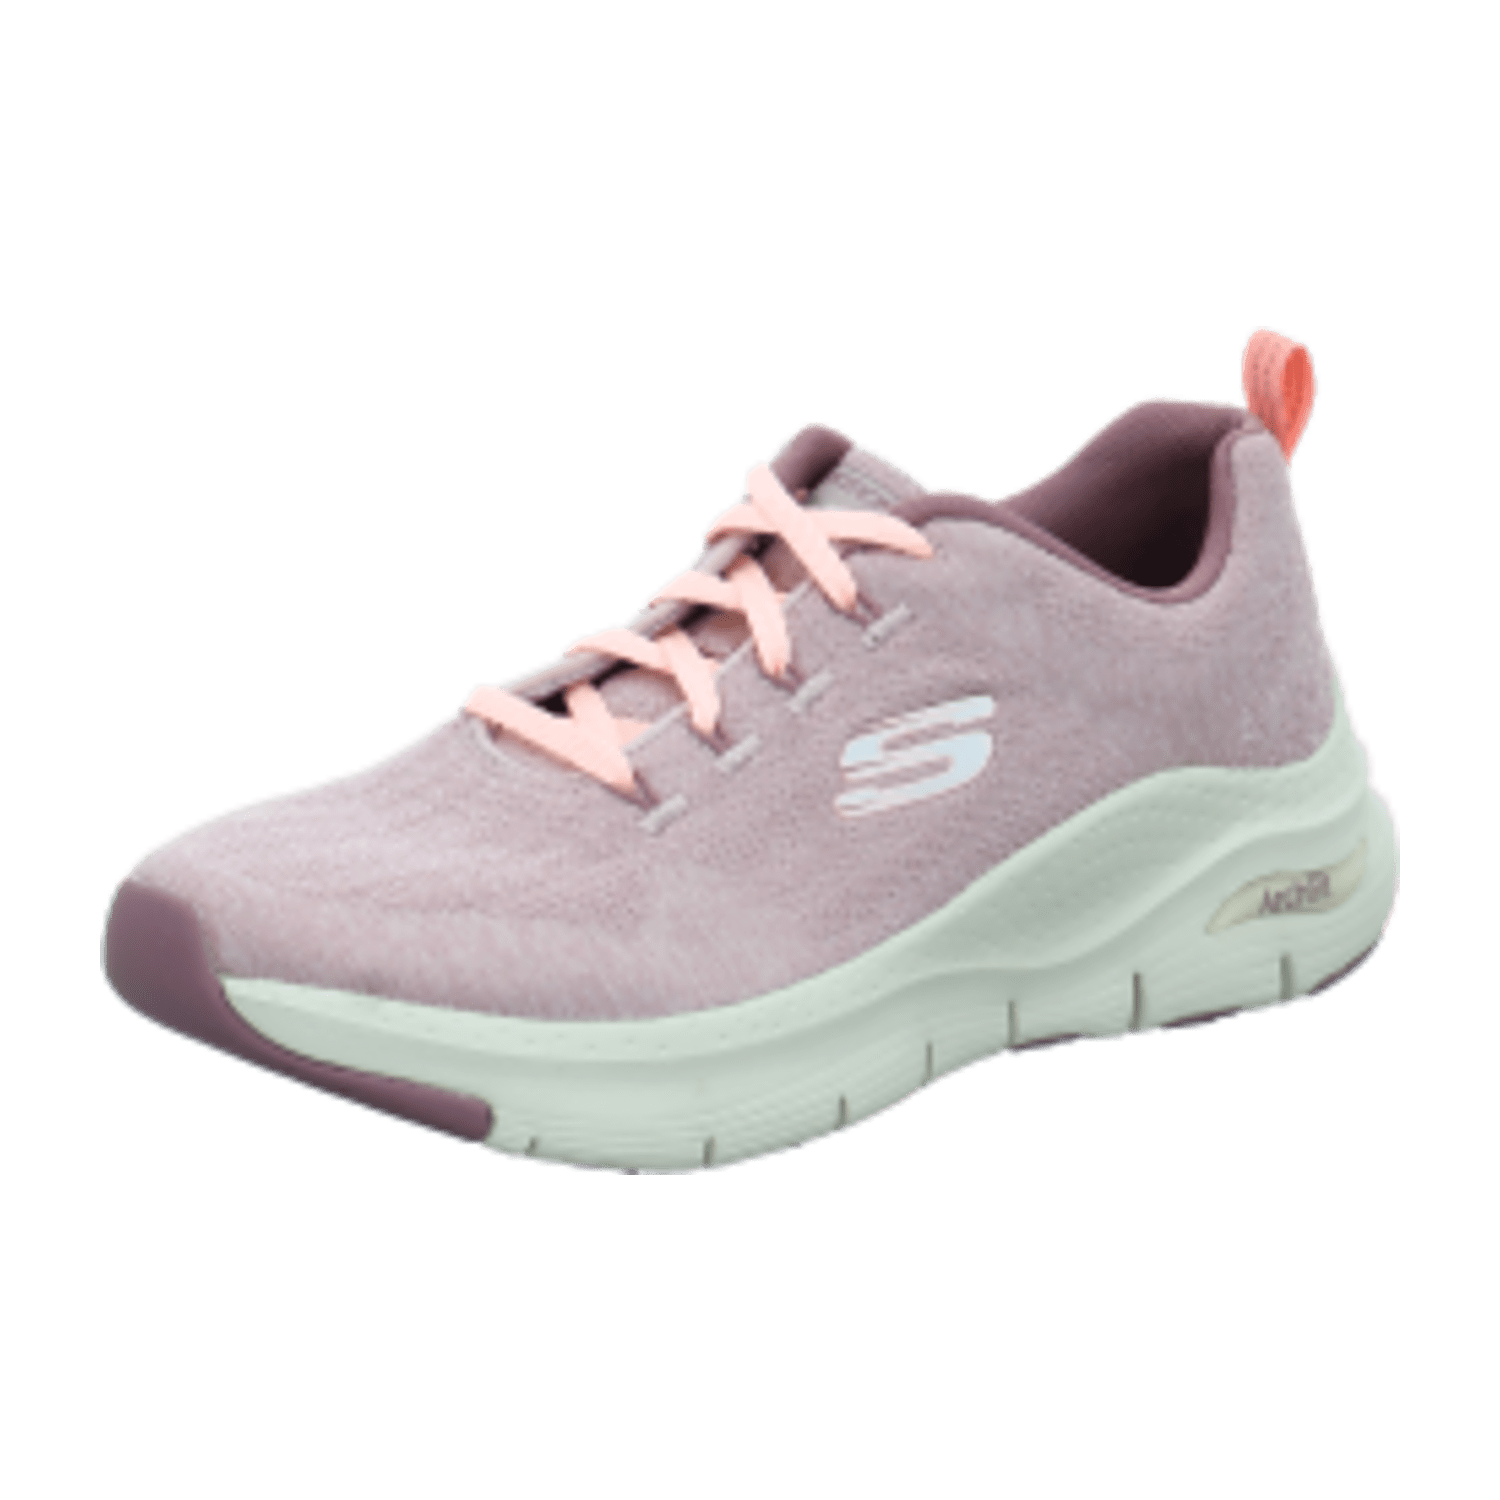 Skechers Engineered Knit Lace-Up